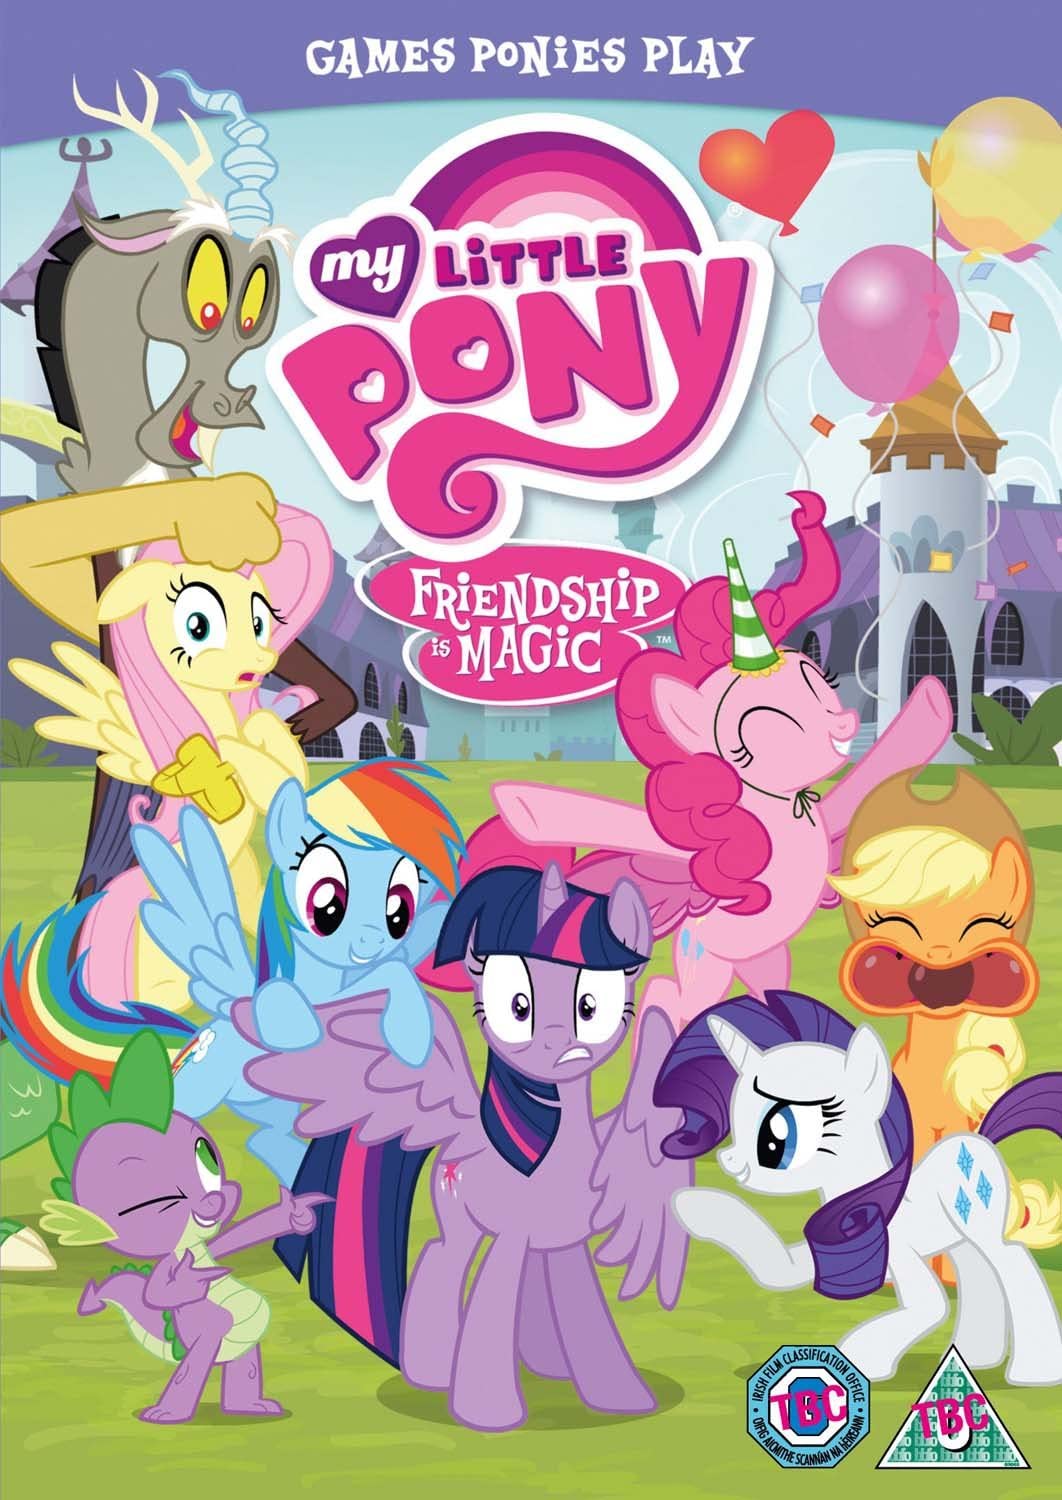 My Little Pony - Friendship Is Magic: Games Ponies Play [DVD]